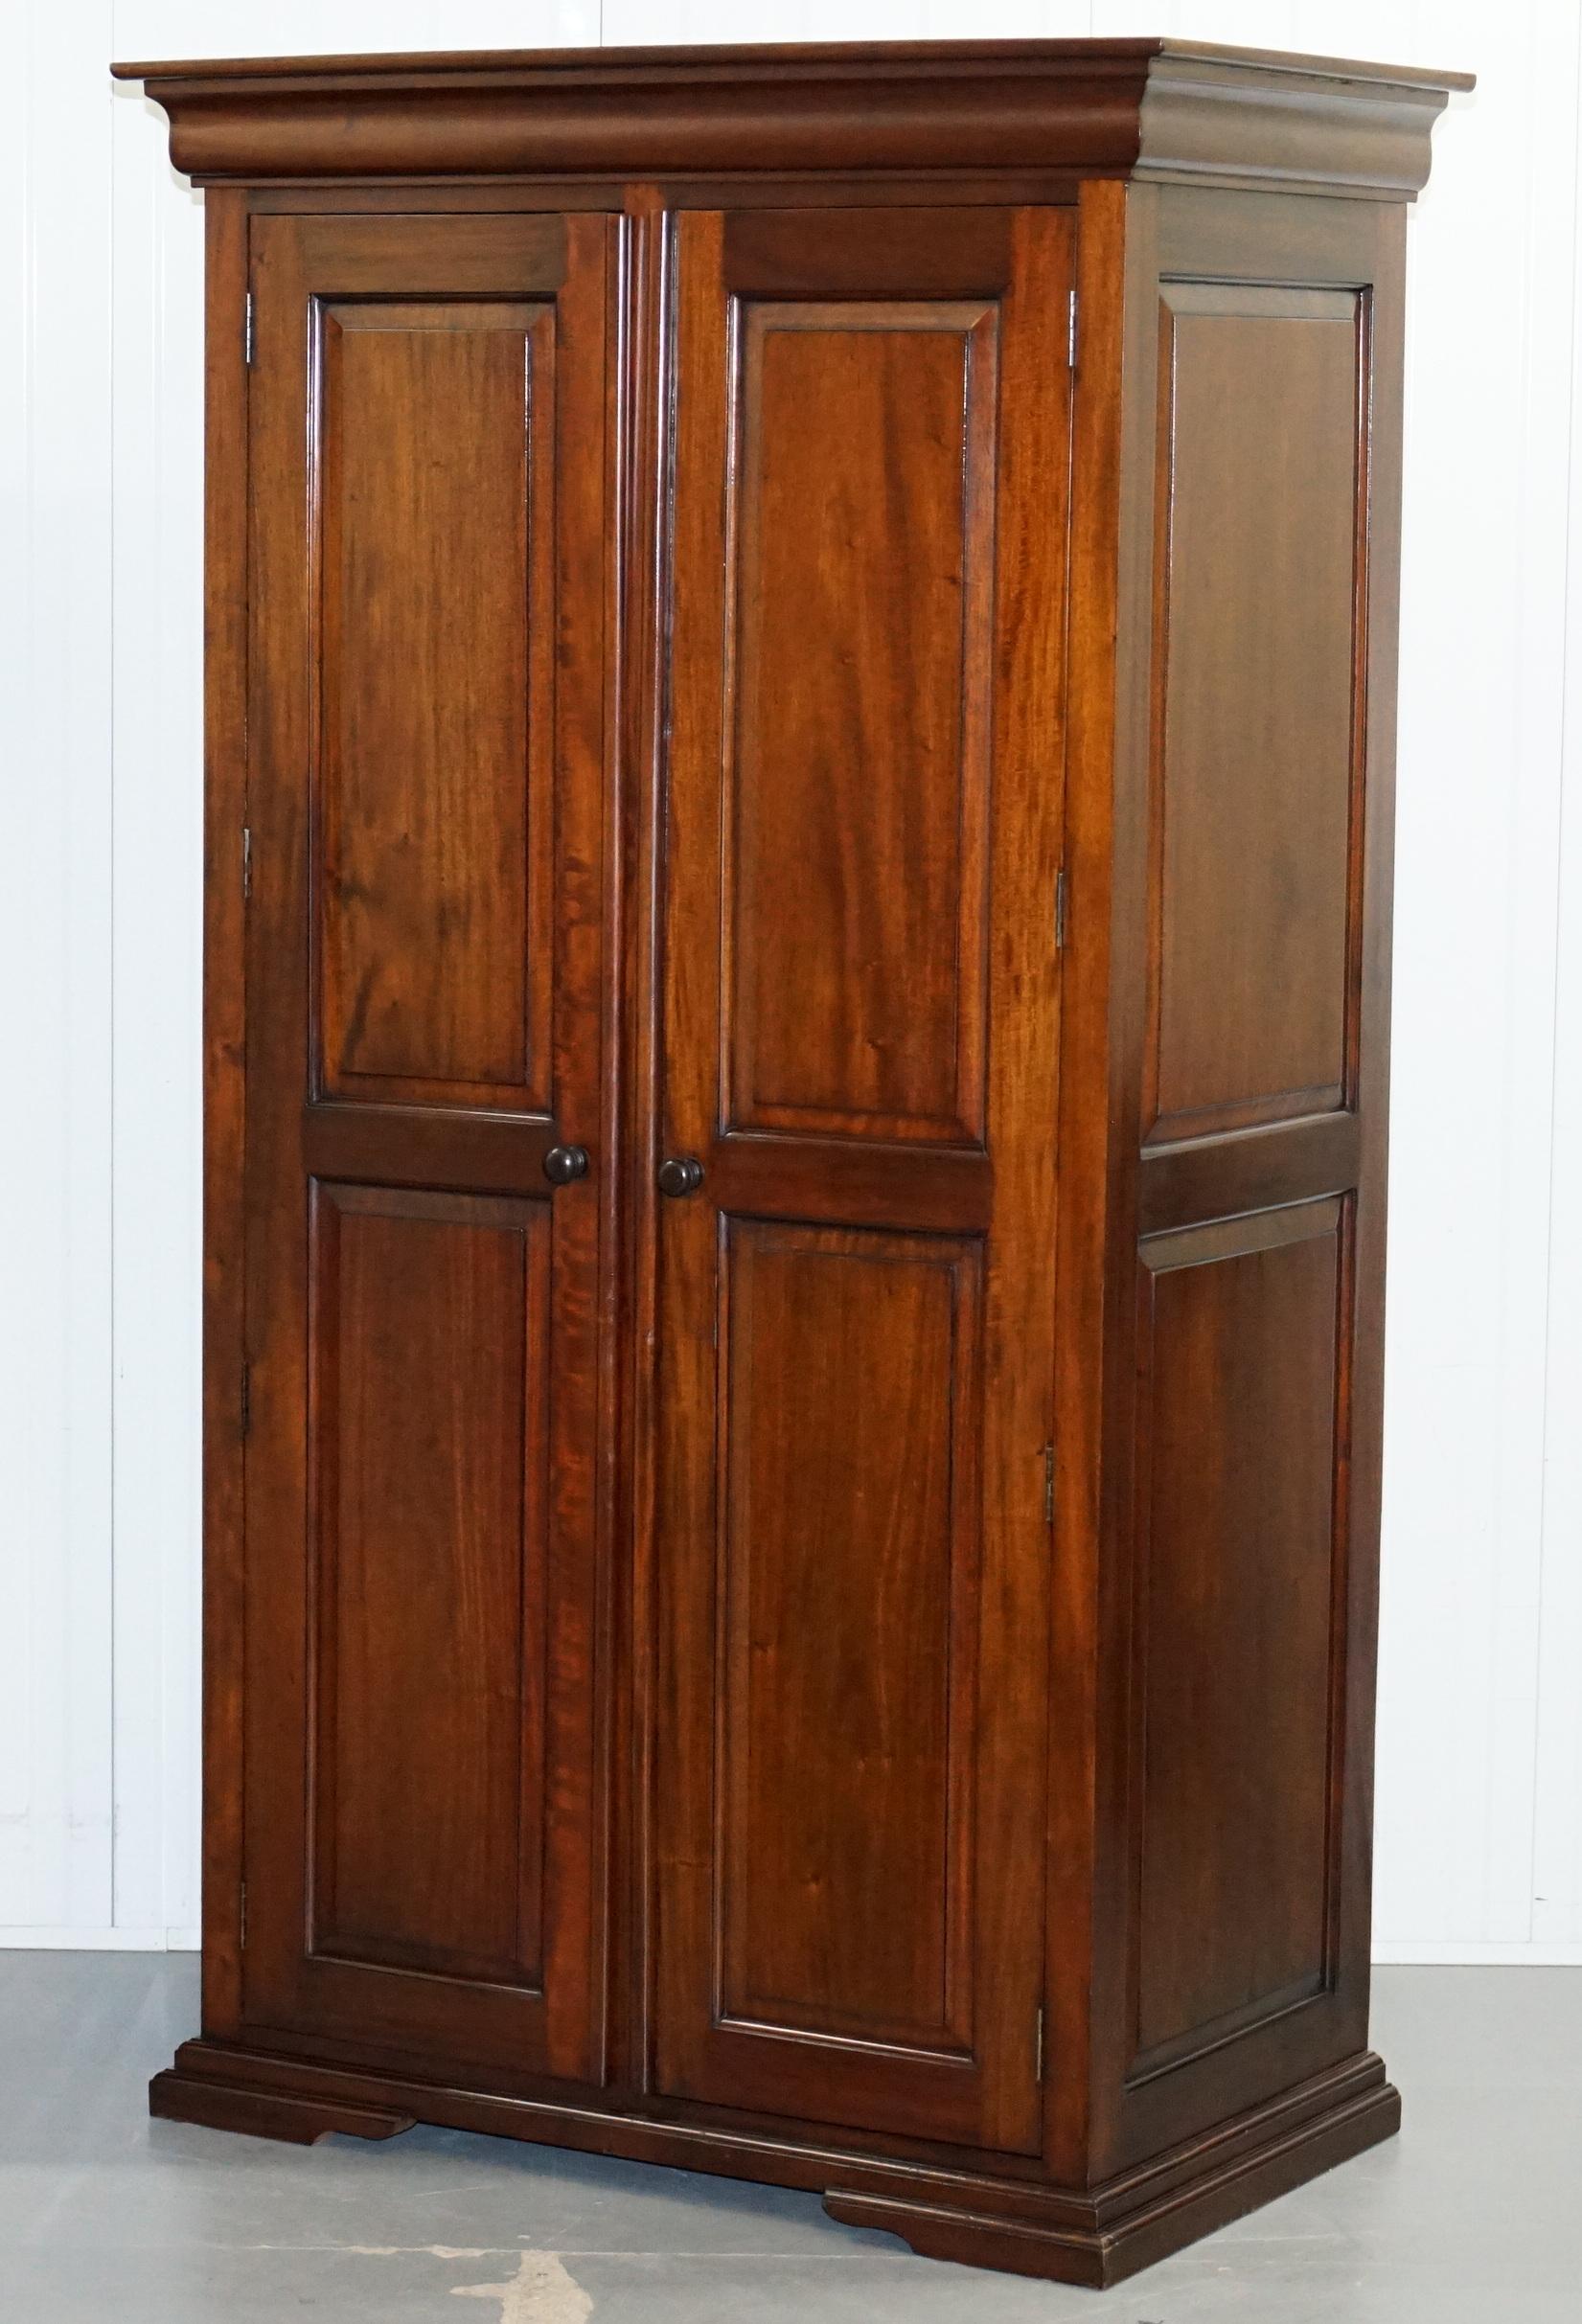 We are delighted to offer for sale this lovely pair of panelled solid mahogany wardrobes

A good looking and well made pair, very utilitarian, very smart, they are ever so slightly different sizes as detailed below but only by 1-2cm's

We have